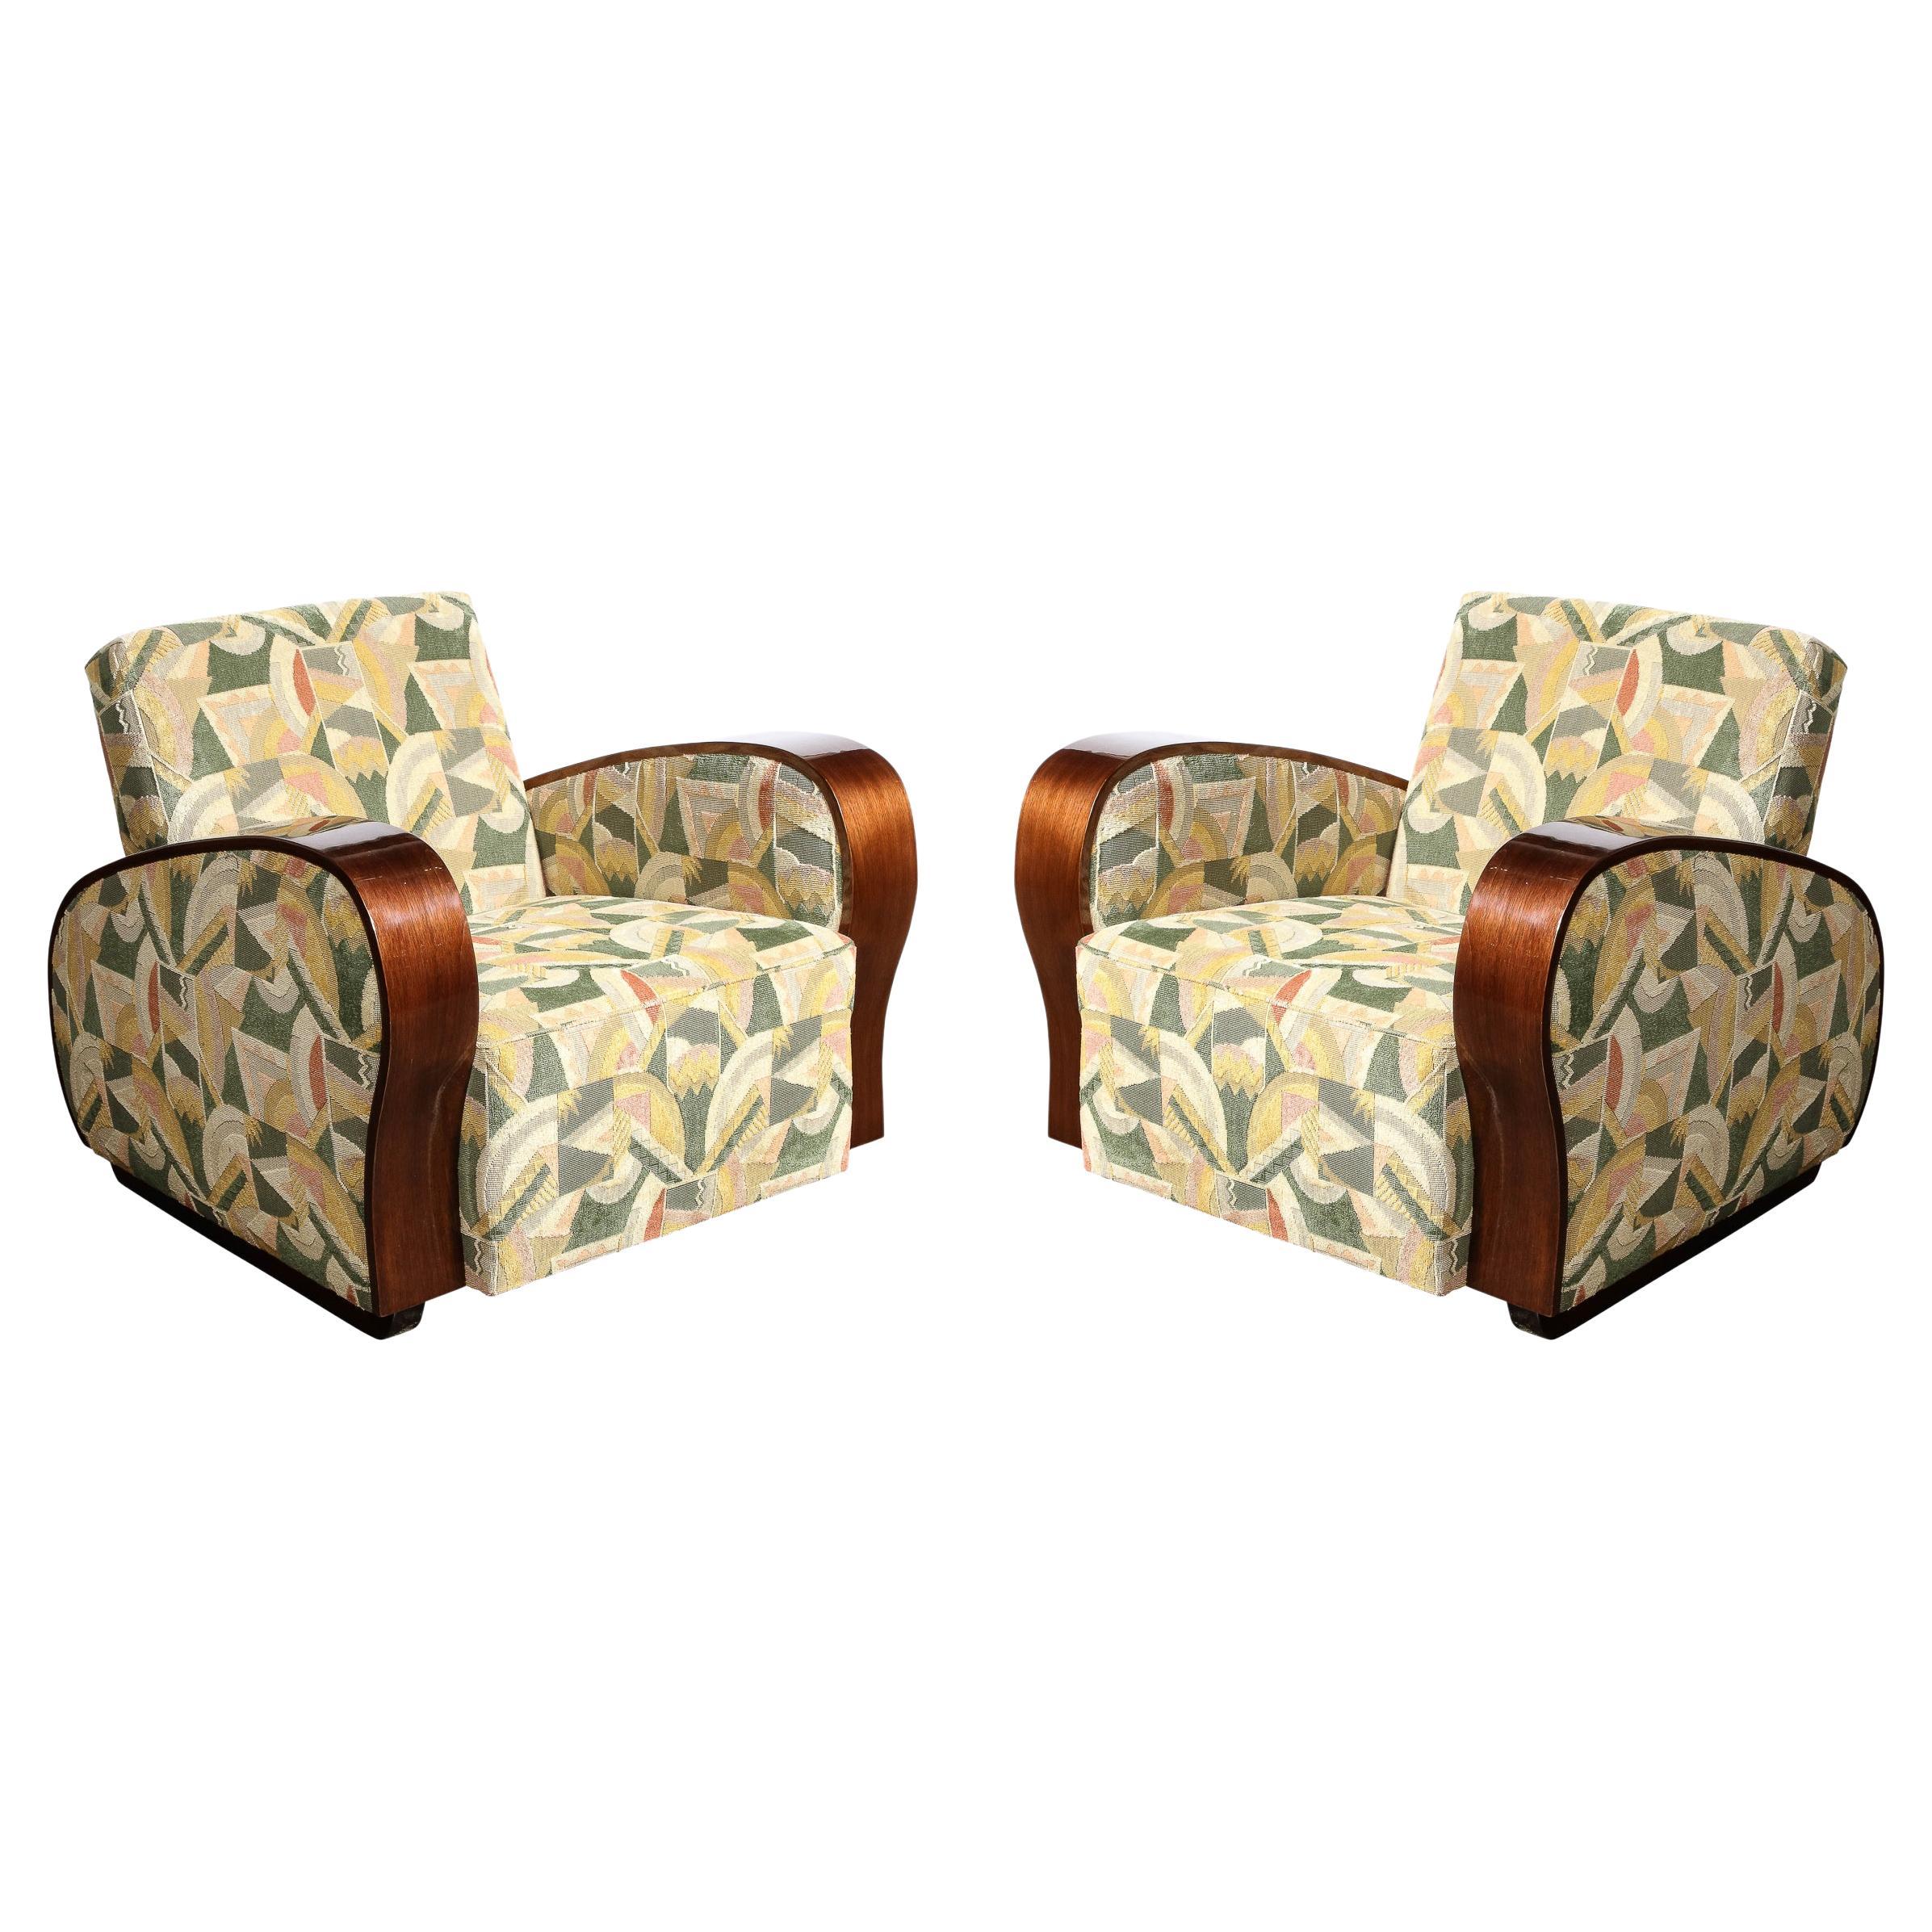 Art Deco Club/Lounge Chairs in Walnut with Rare Clarence House Upholstery